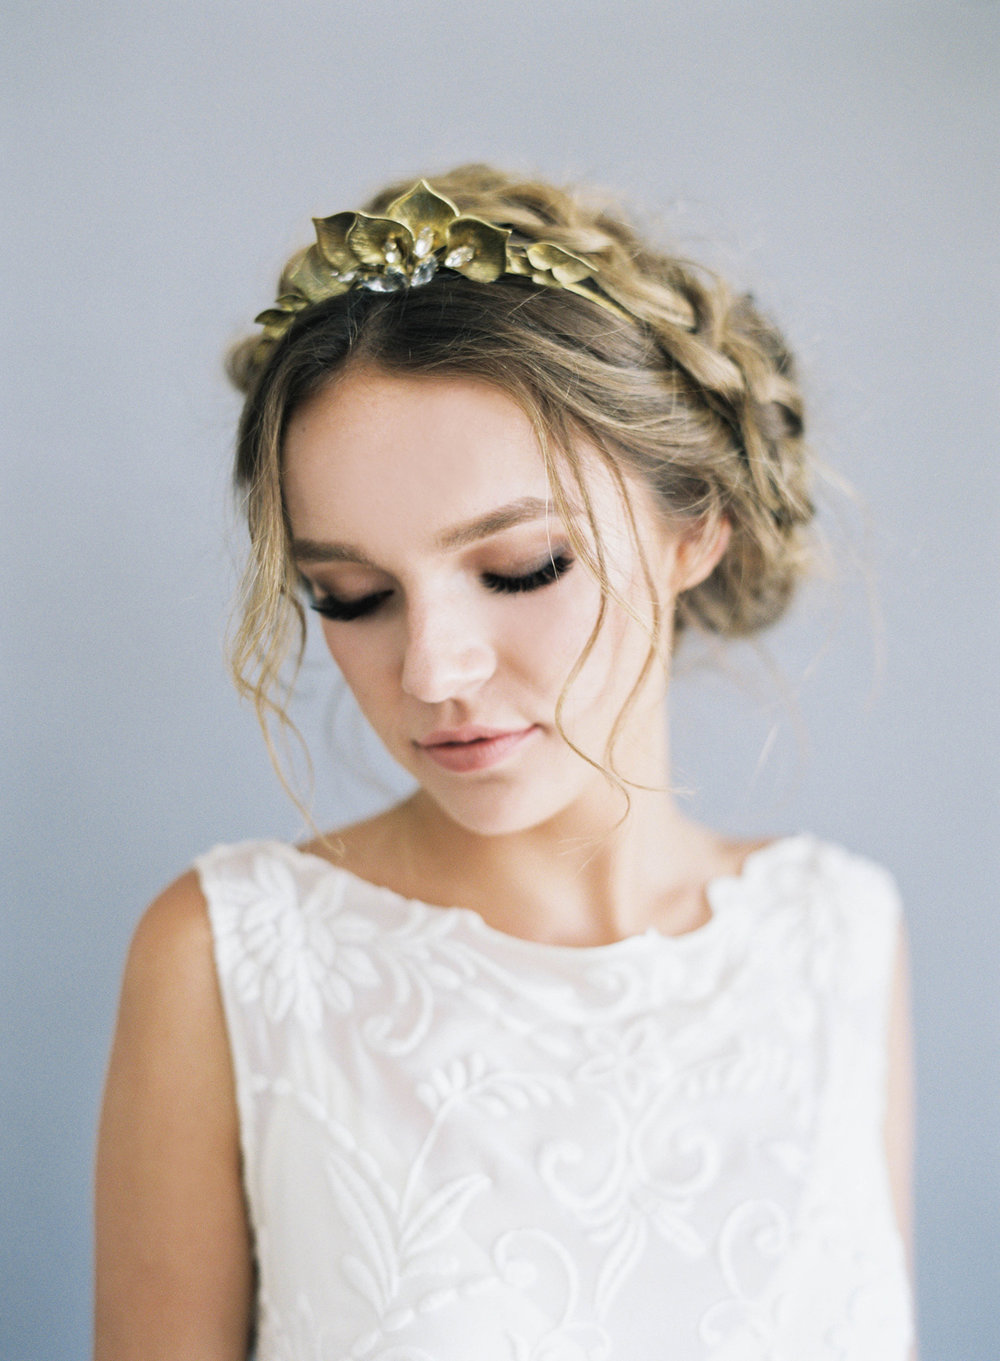 A boho inspired tiara with an herbal twist and just a bit of crystal - the Hushed Commotion   Quinn     tiara is loved by many HC brides and even better super easy to style in your wedding day hair!